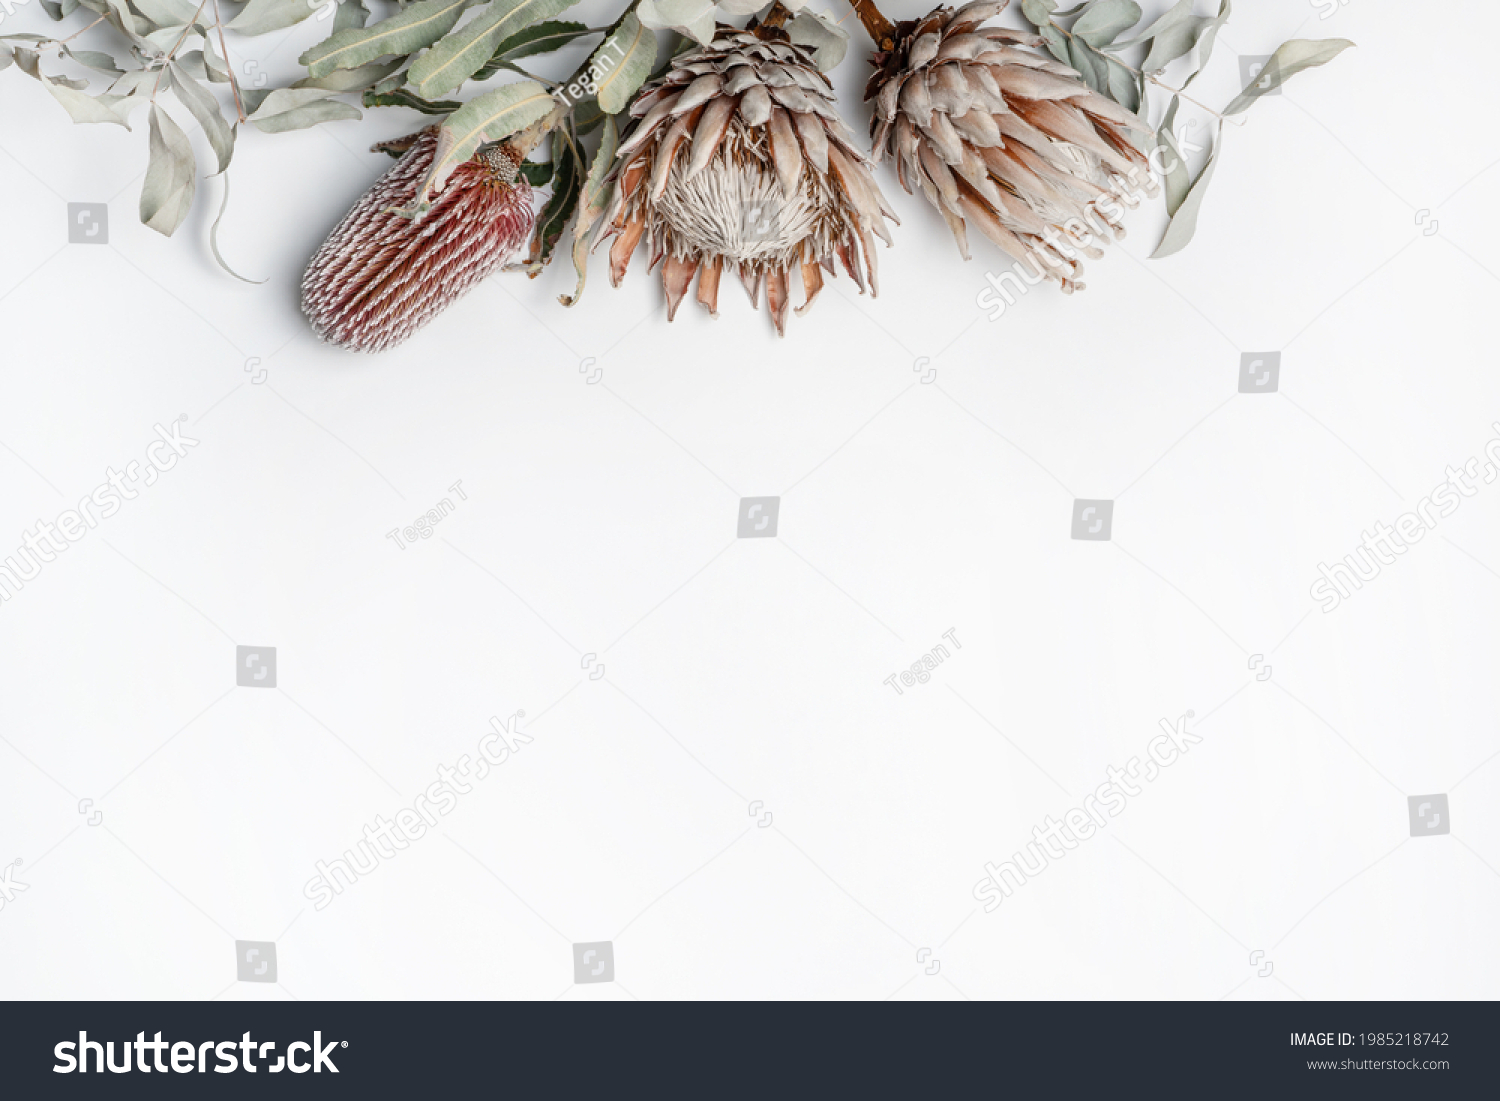 Beautiful dried flower decorative arrangement including Eucalyptus leaves,  King Protea and Banksia flowers in red, pink and purple on a white background, photographed from above. #1985218742